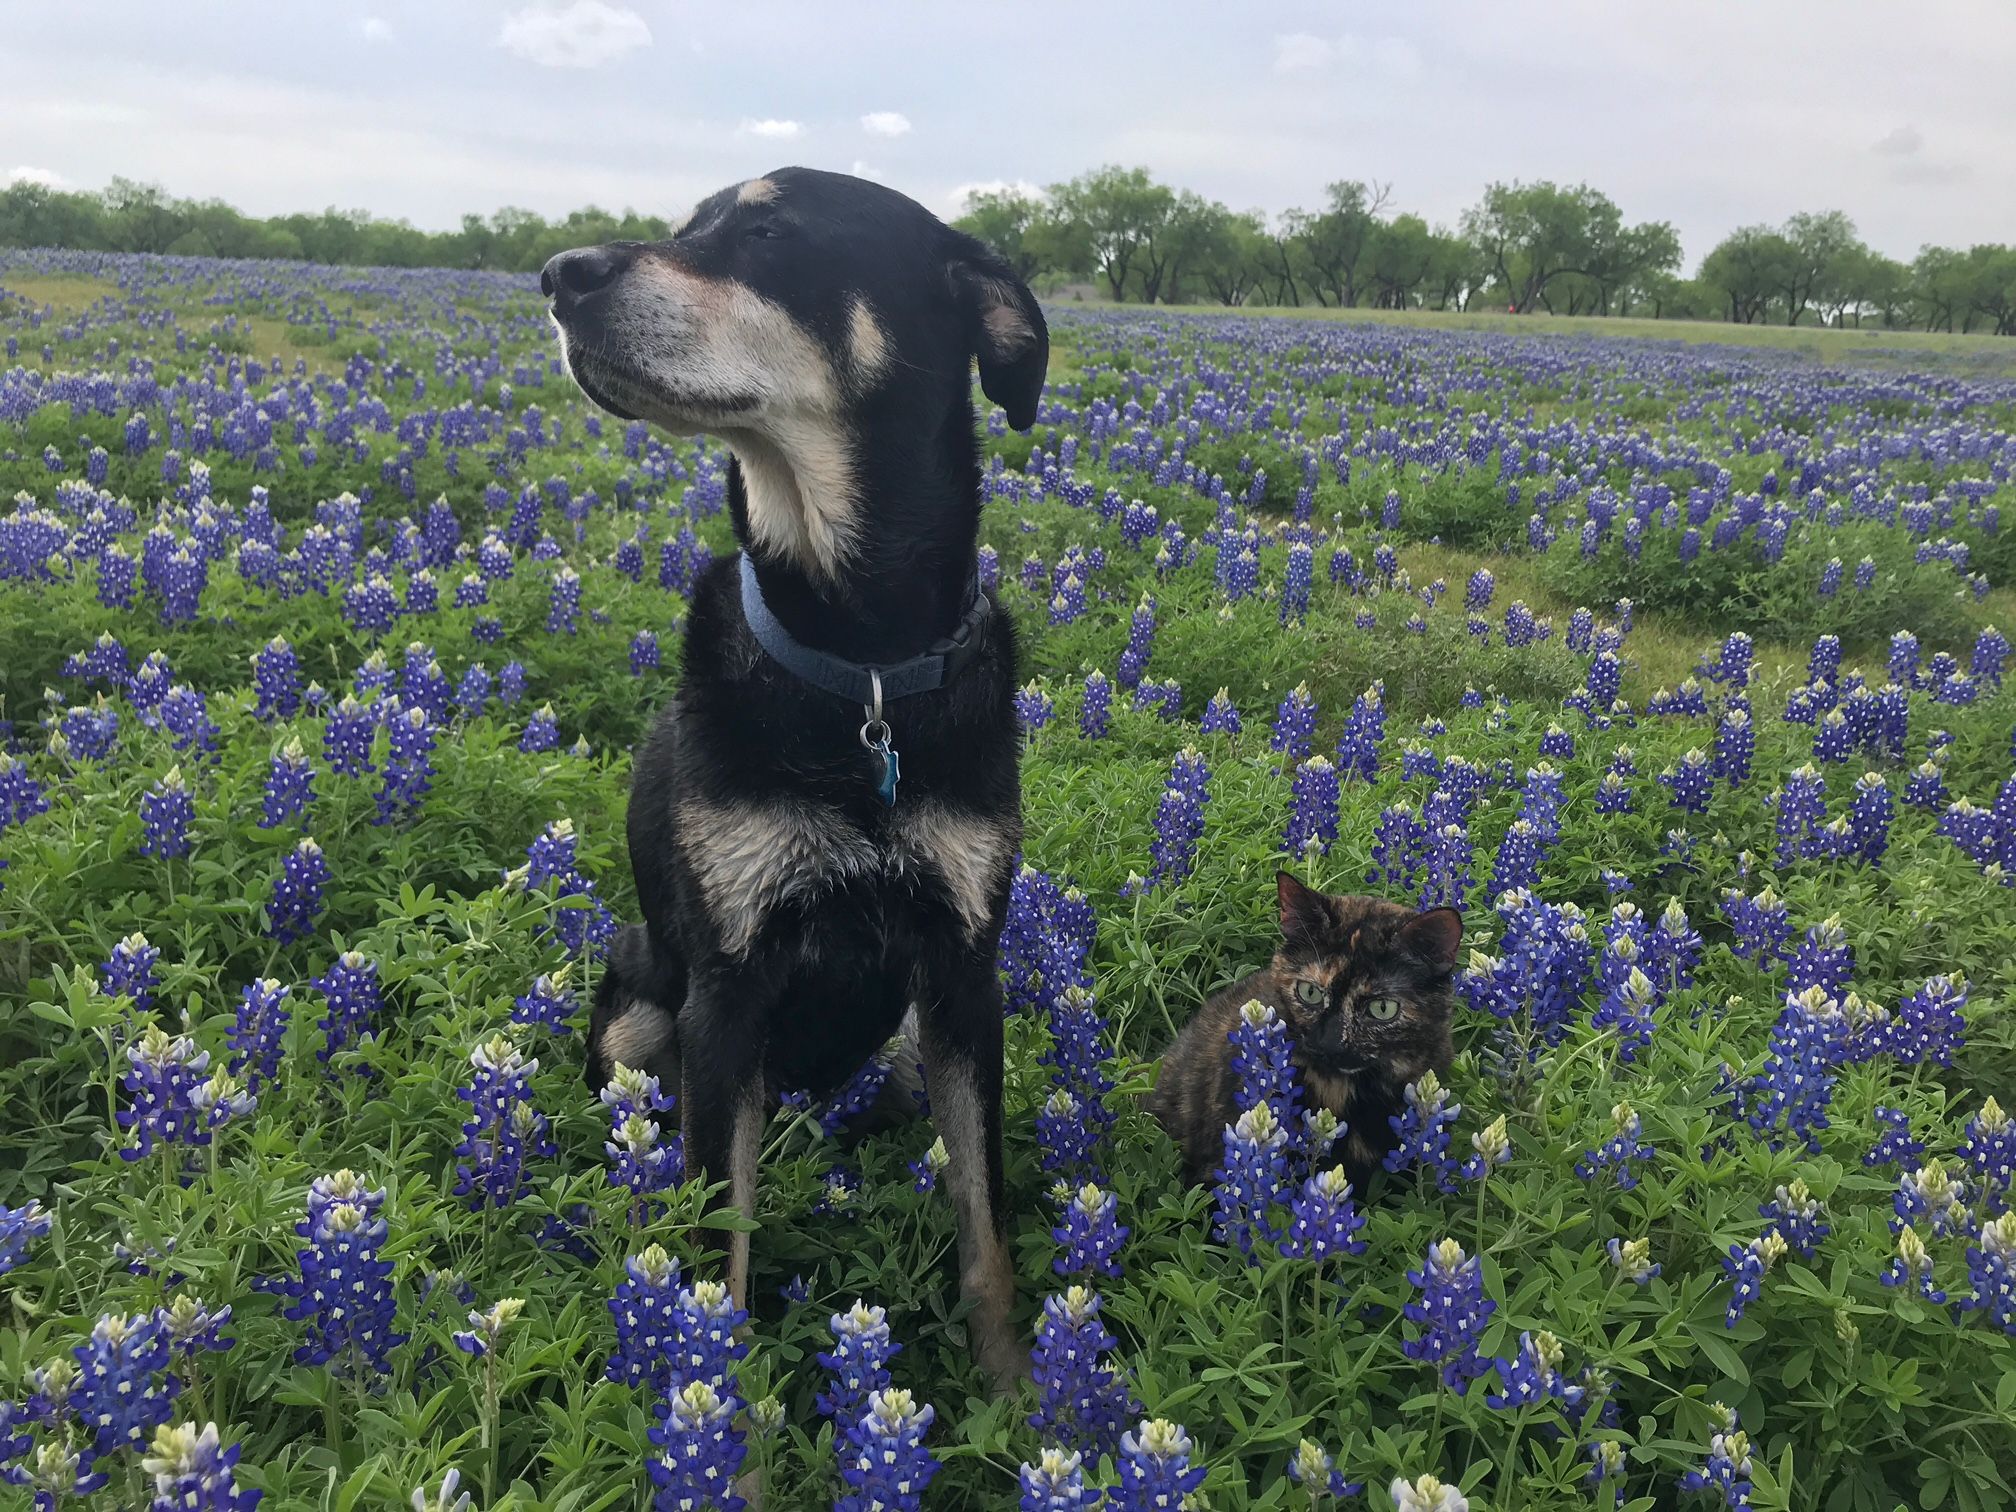 A dog and cat amid bluebonnets.